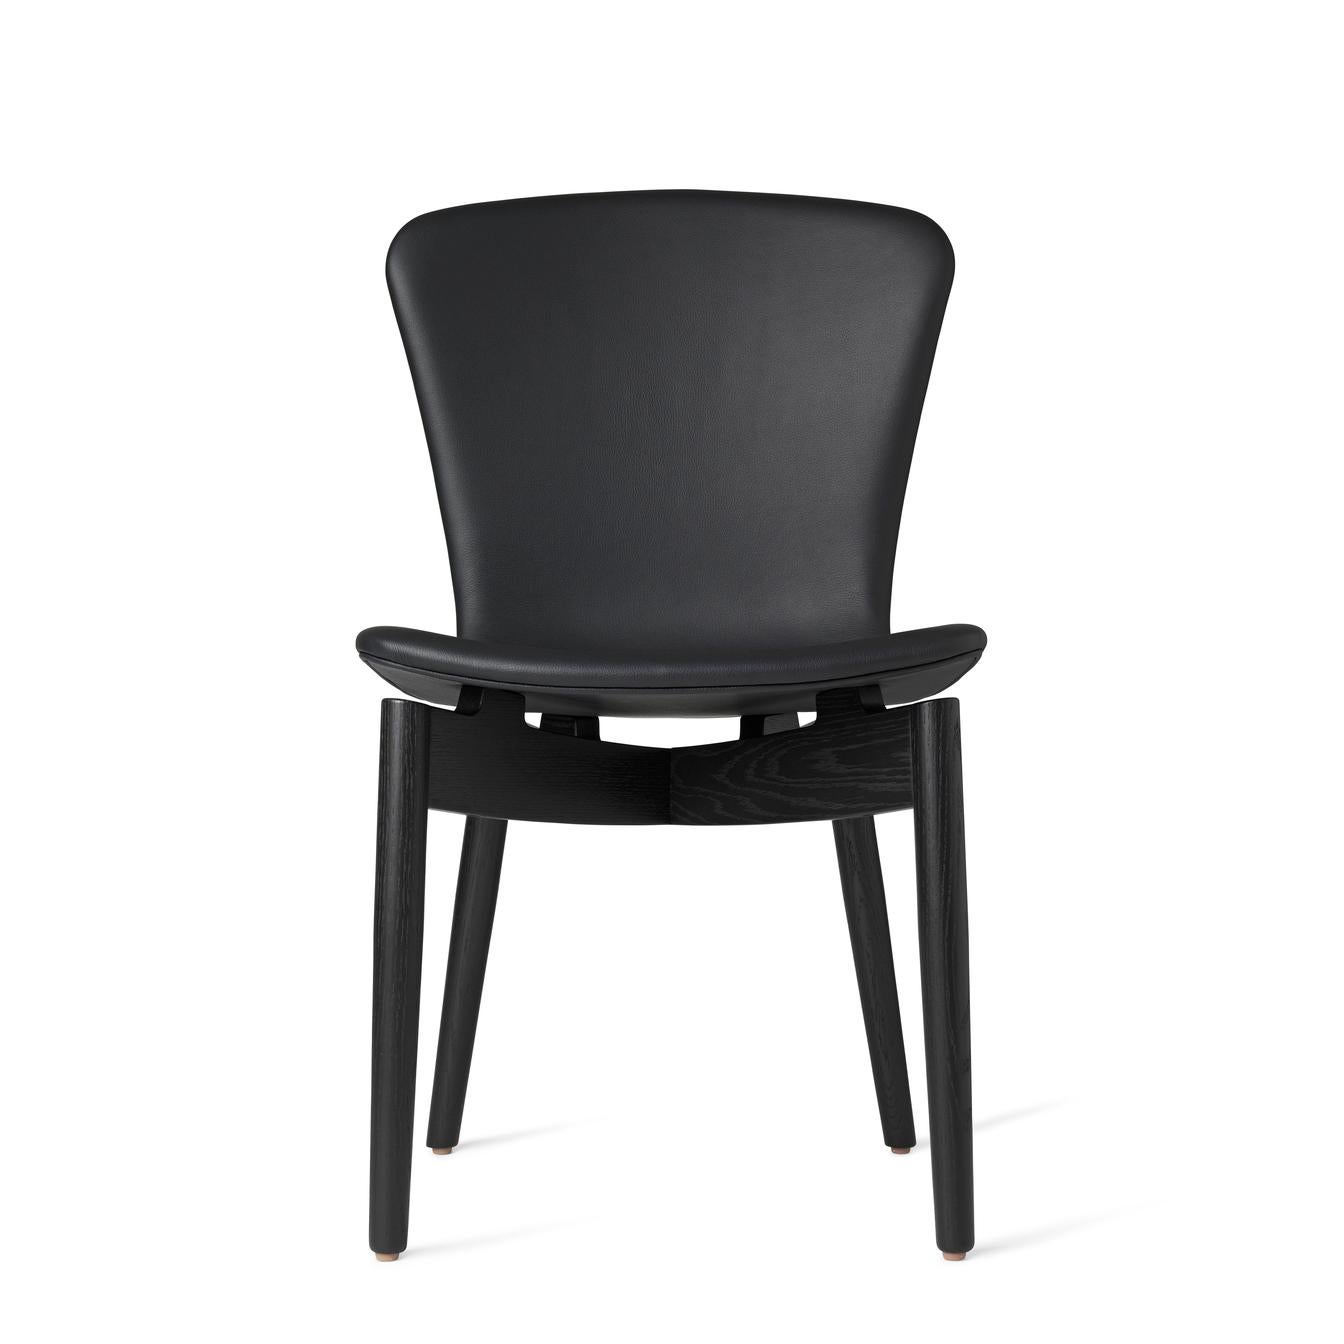 The Mater Shell dining chair is now introduced with a new and softer leather upholstery version of the Mater Shell chair designed by Michael Dreeben. The collaboration with the most recognised Danish leather supplier, Sorensen Leathers, is bringing